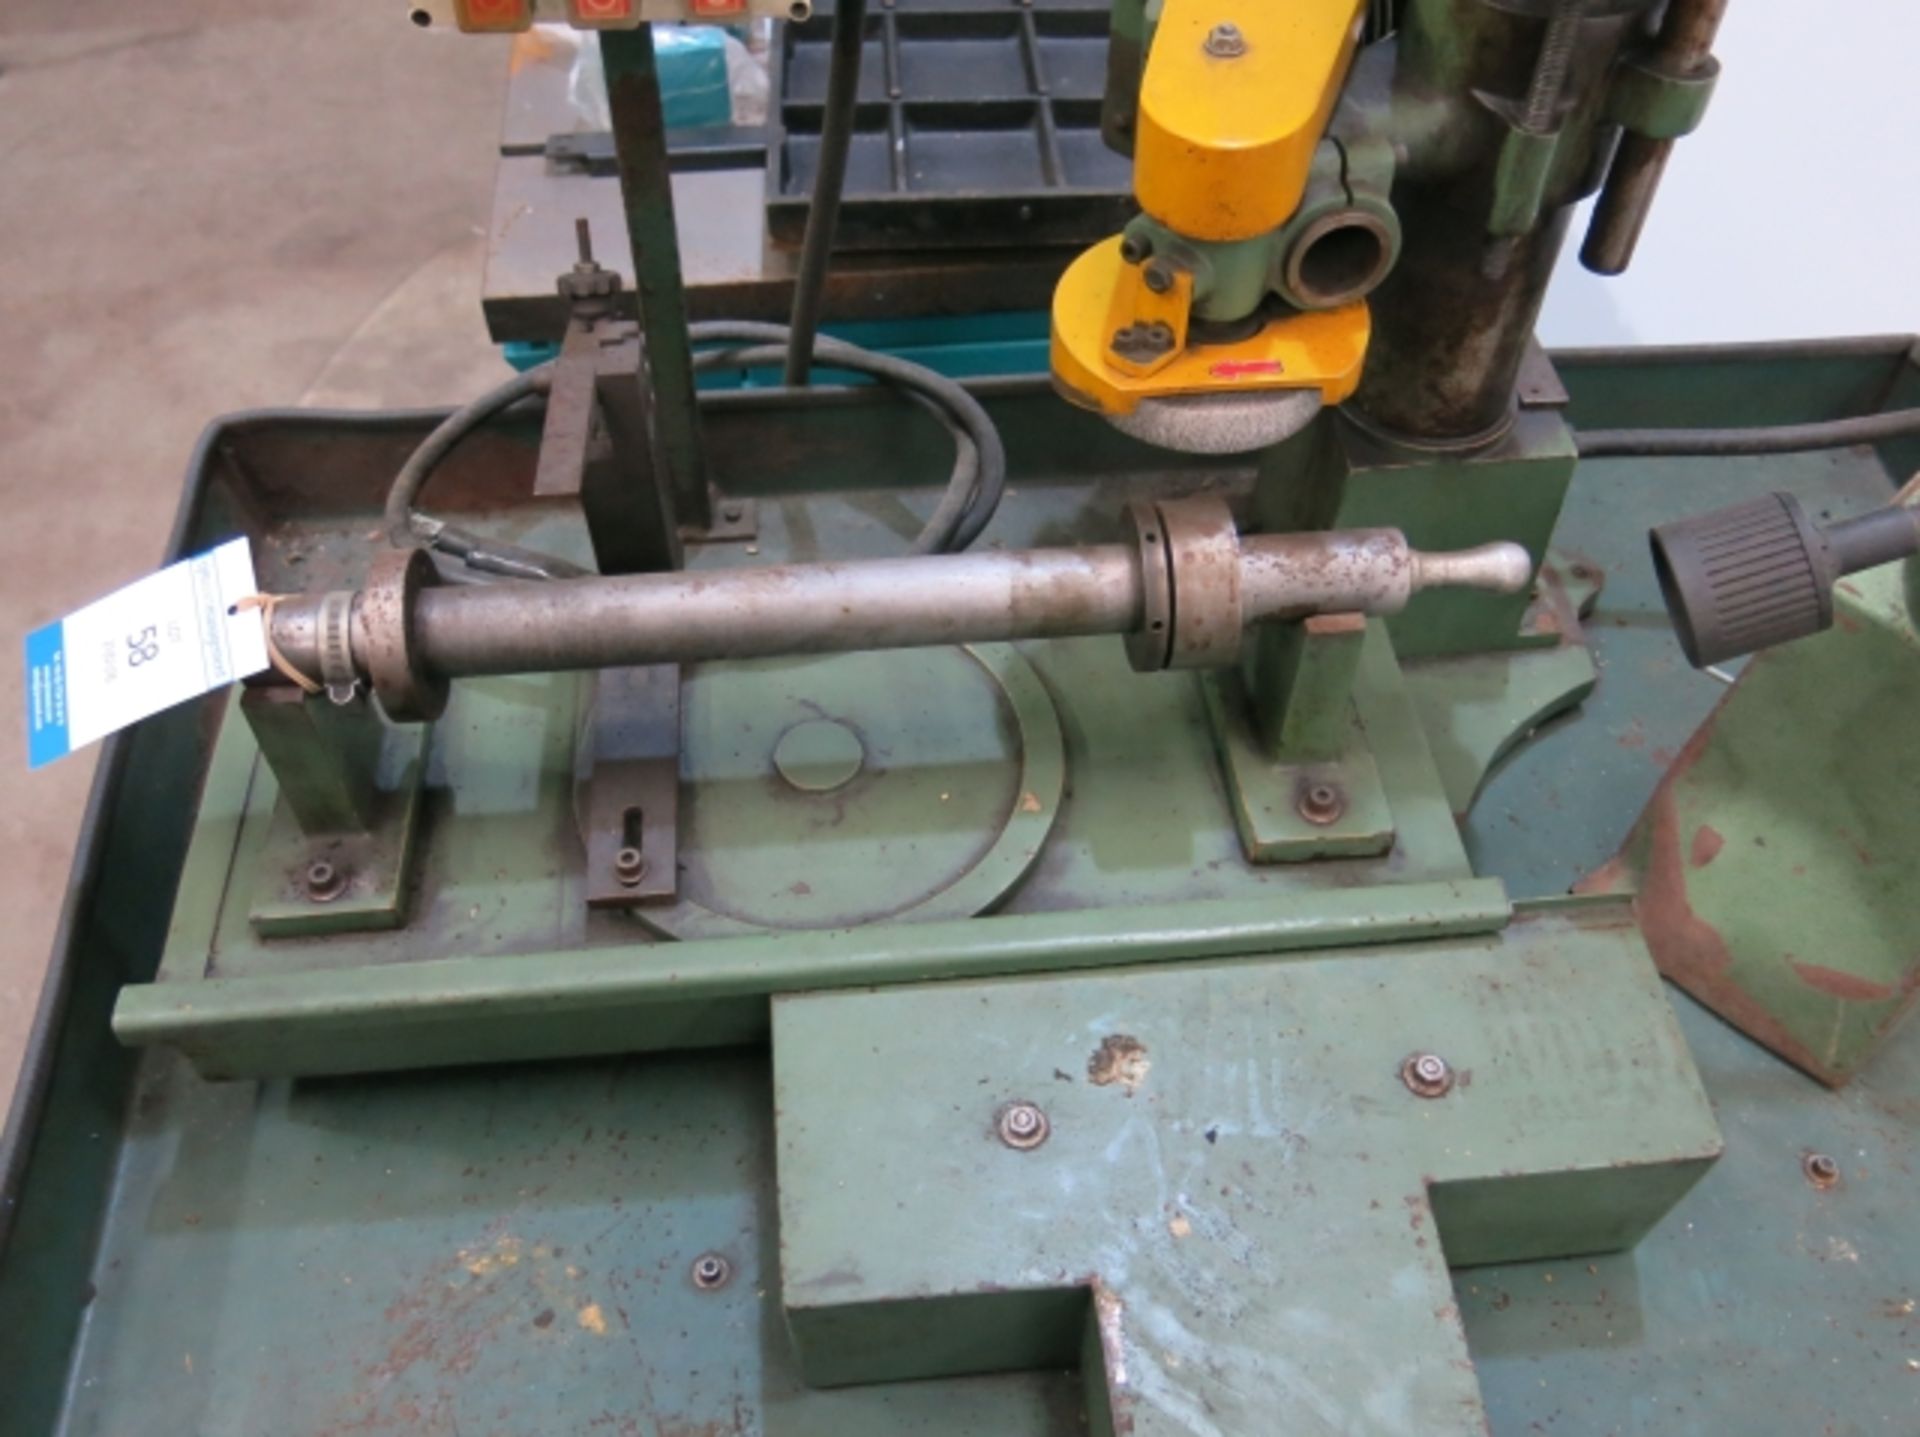 * Autool Cutter Grinder; 3 phase; serial number 19716/PB300. Please note there is a £5 plus VAT Lift - Image 2 of 4